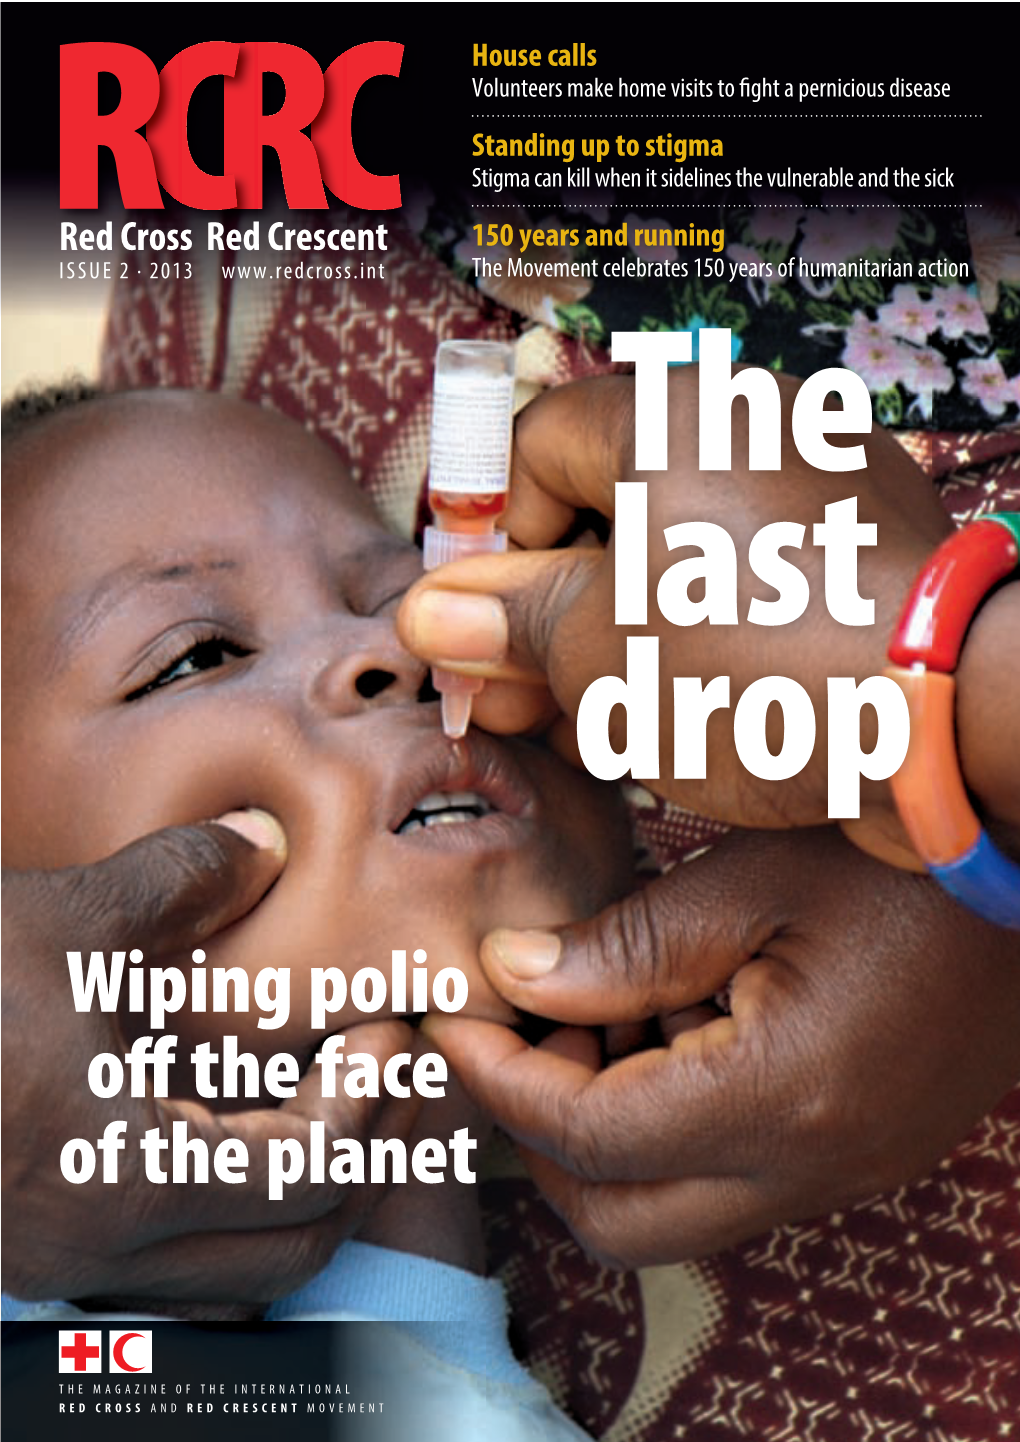 Wiping Polio Off the Face of the Planet